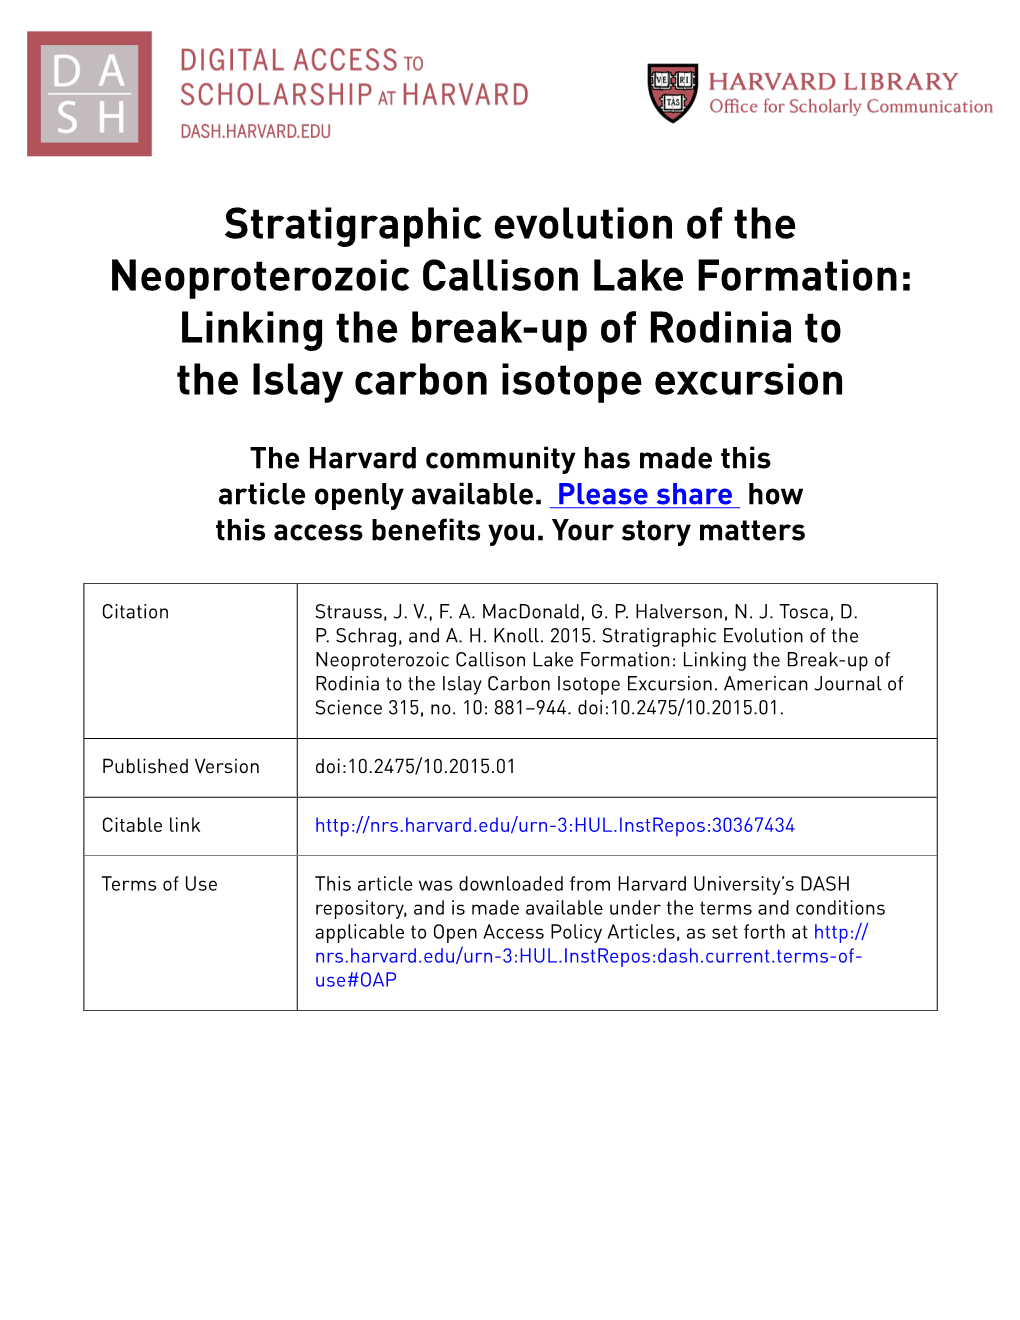 Stratigraphic Evolution of the Neoproterozoic Callison Lake Formation: Linking the Break-Up of Rodinia to the Islay Carbon Isotope Excursion